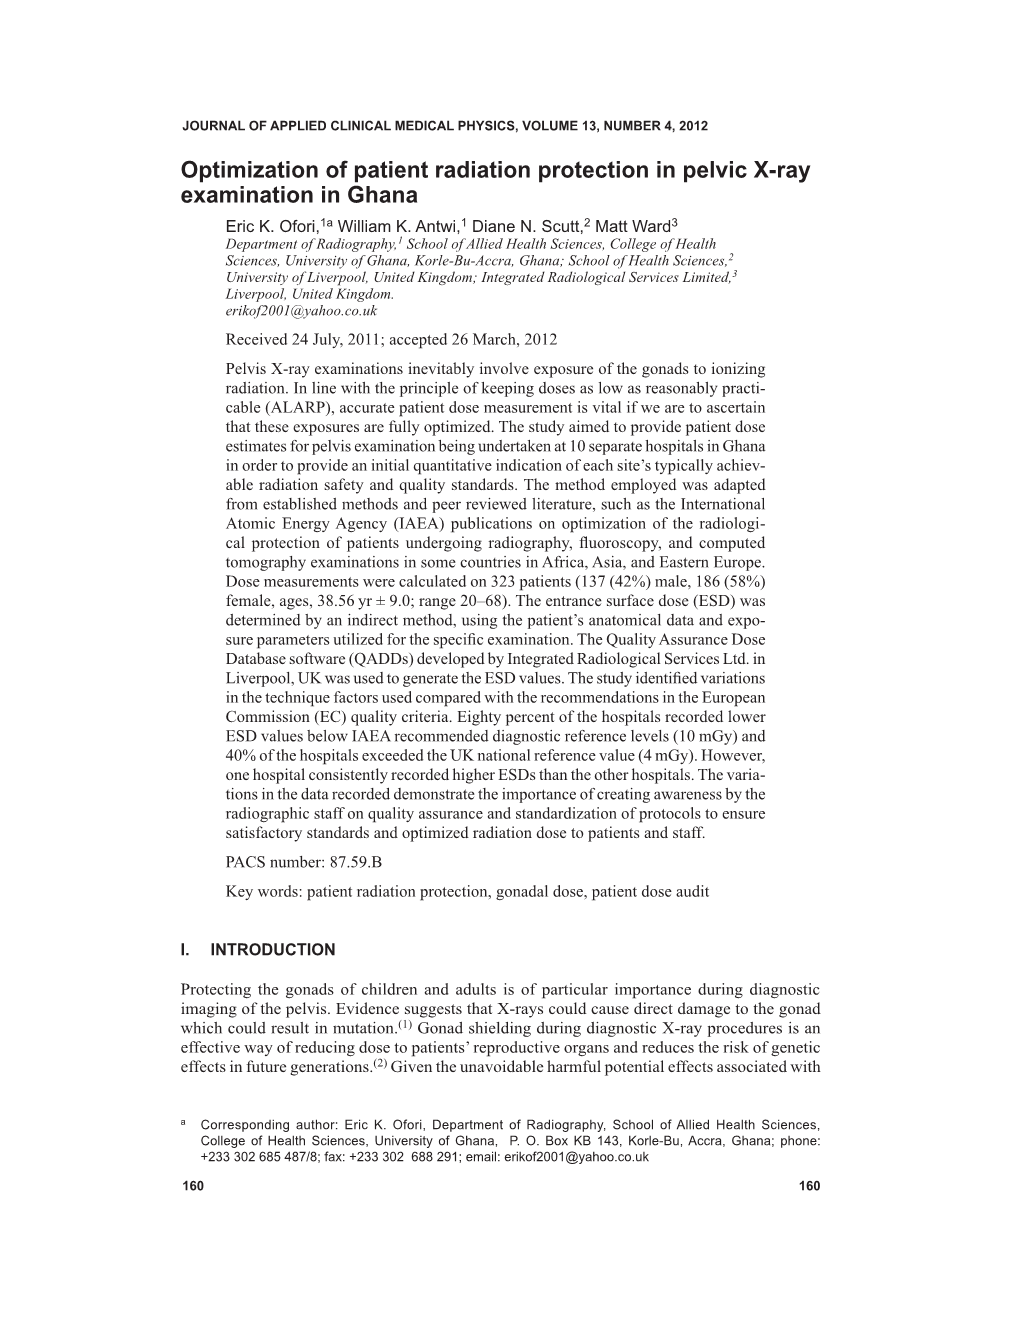 Optimization of Patient Radiation Protection in Pelvic X-Ray Examination in Ghana Eric K